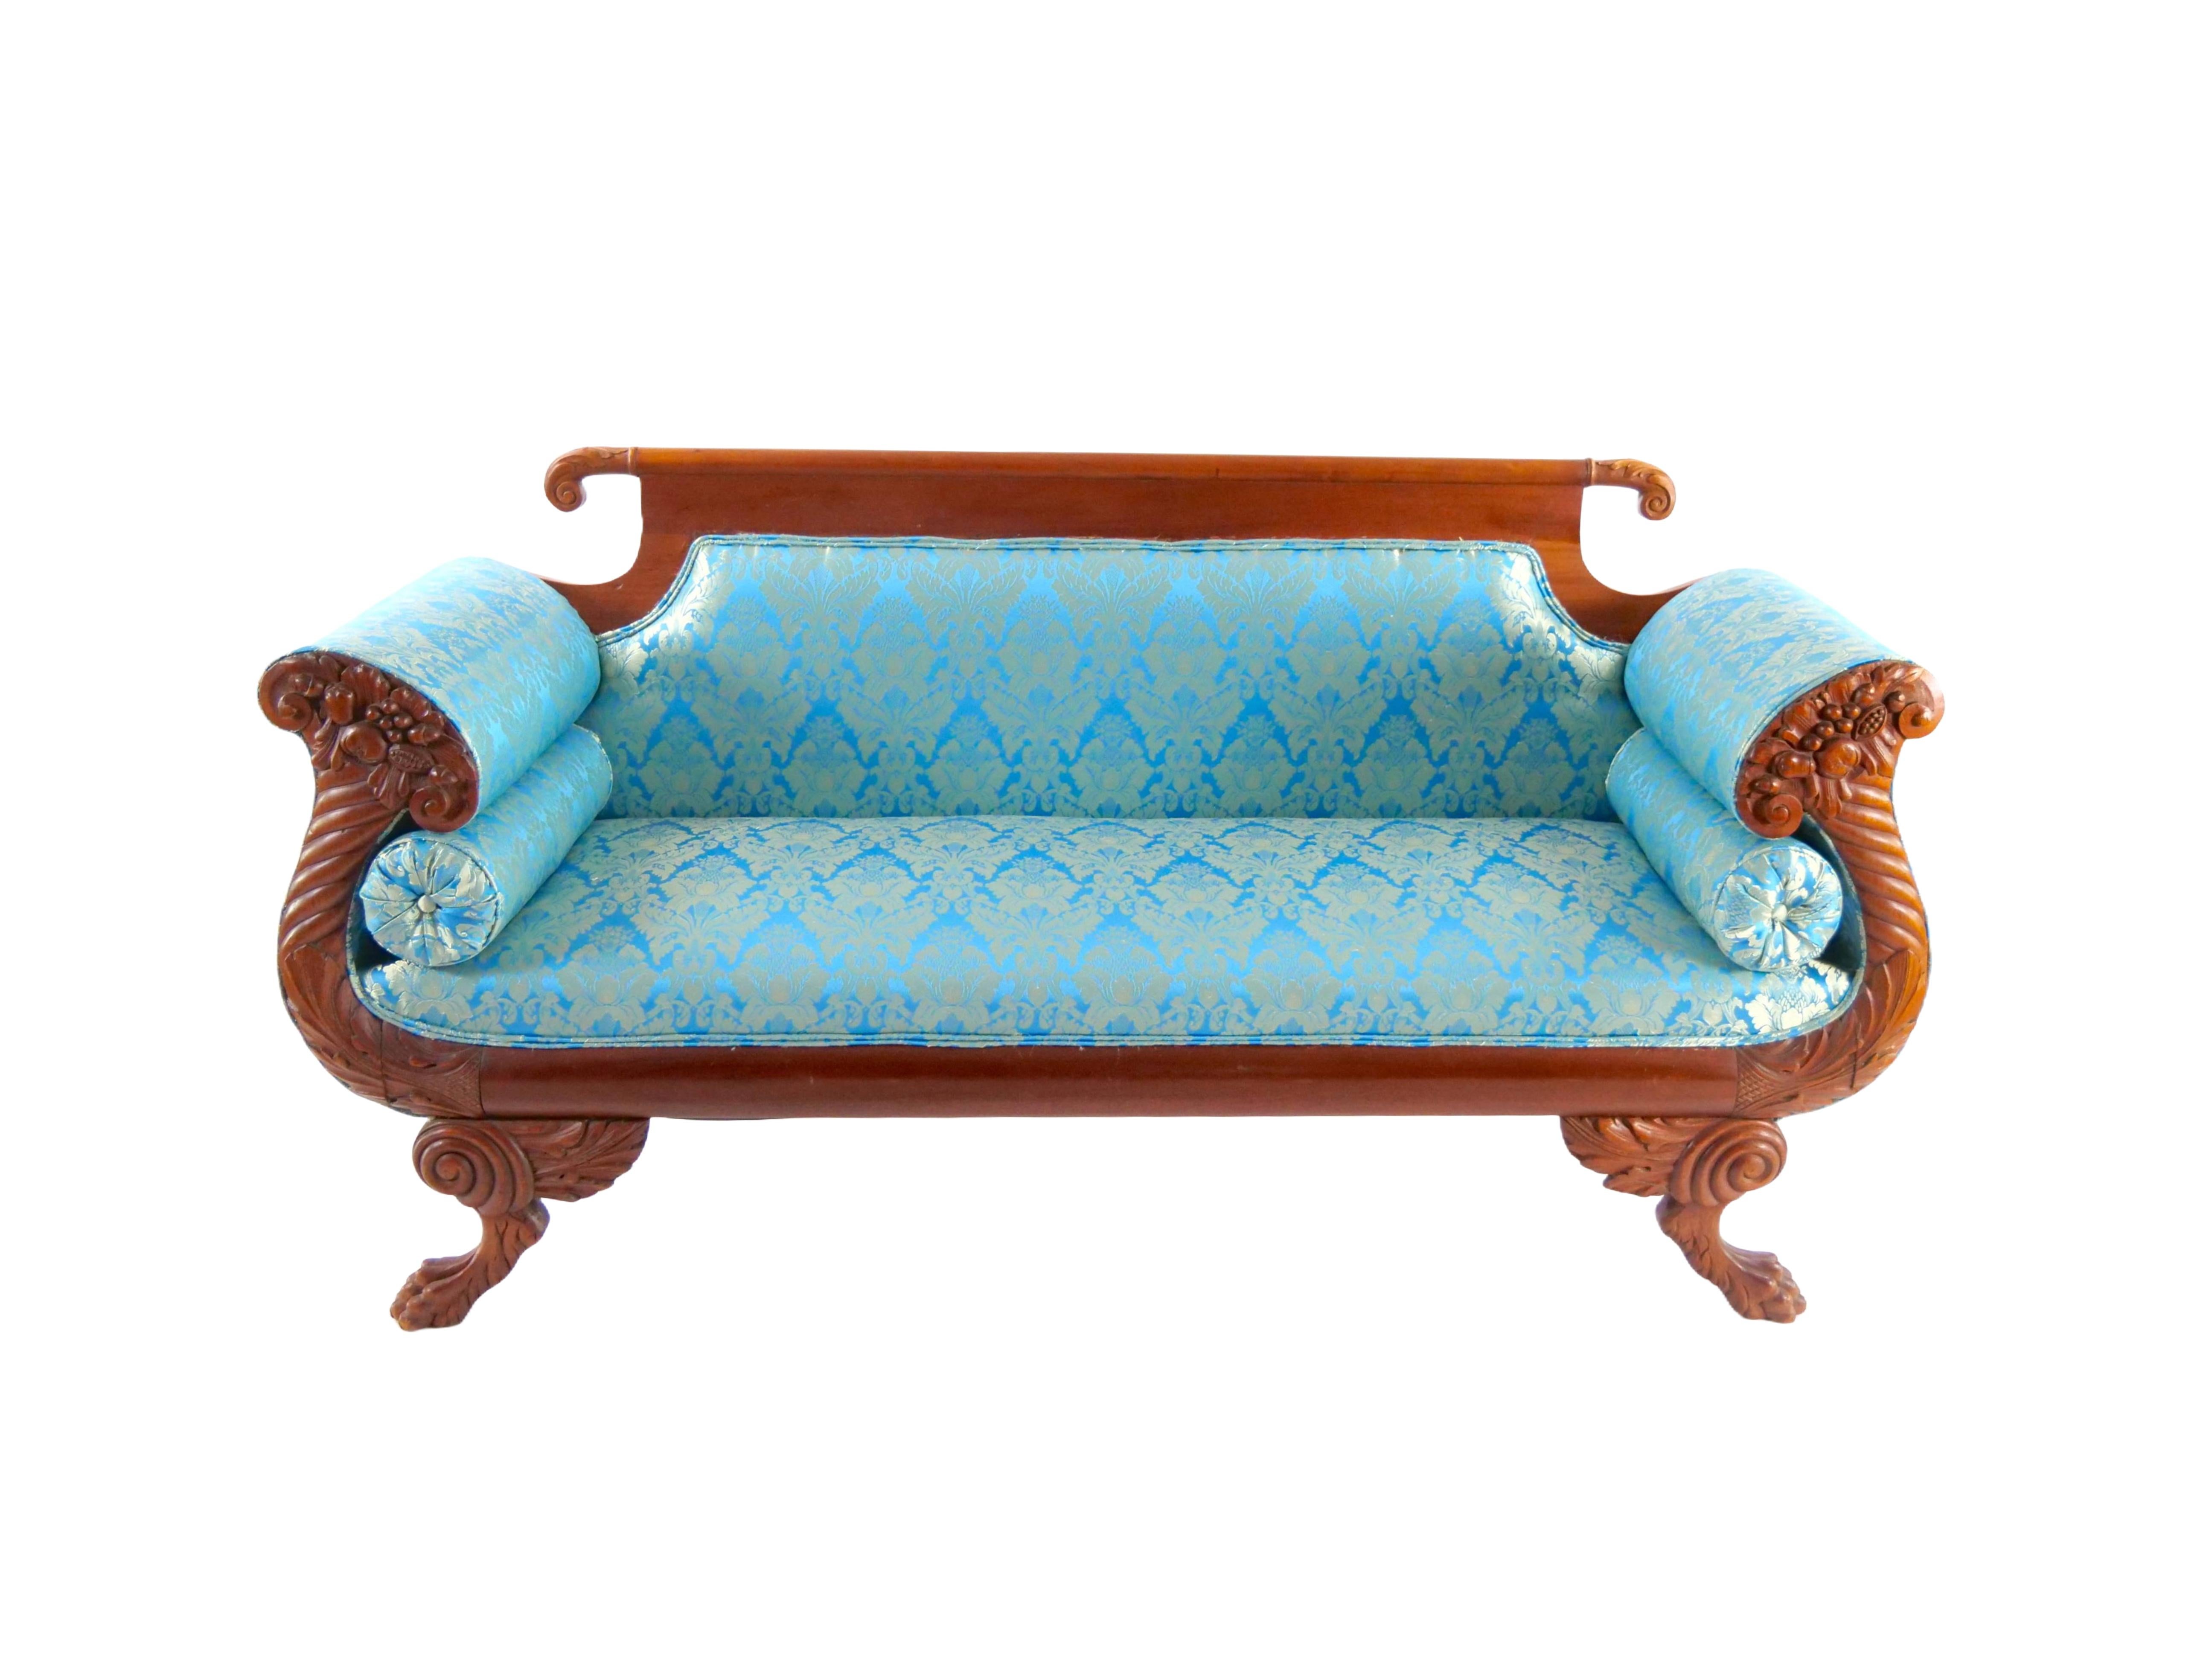 19th Century Mahogany Wood Framed Empire Style Upholstered Sofa For Sale 5